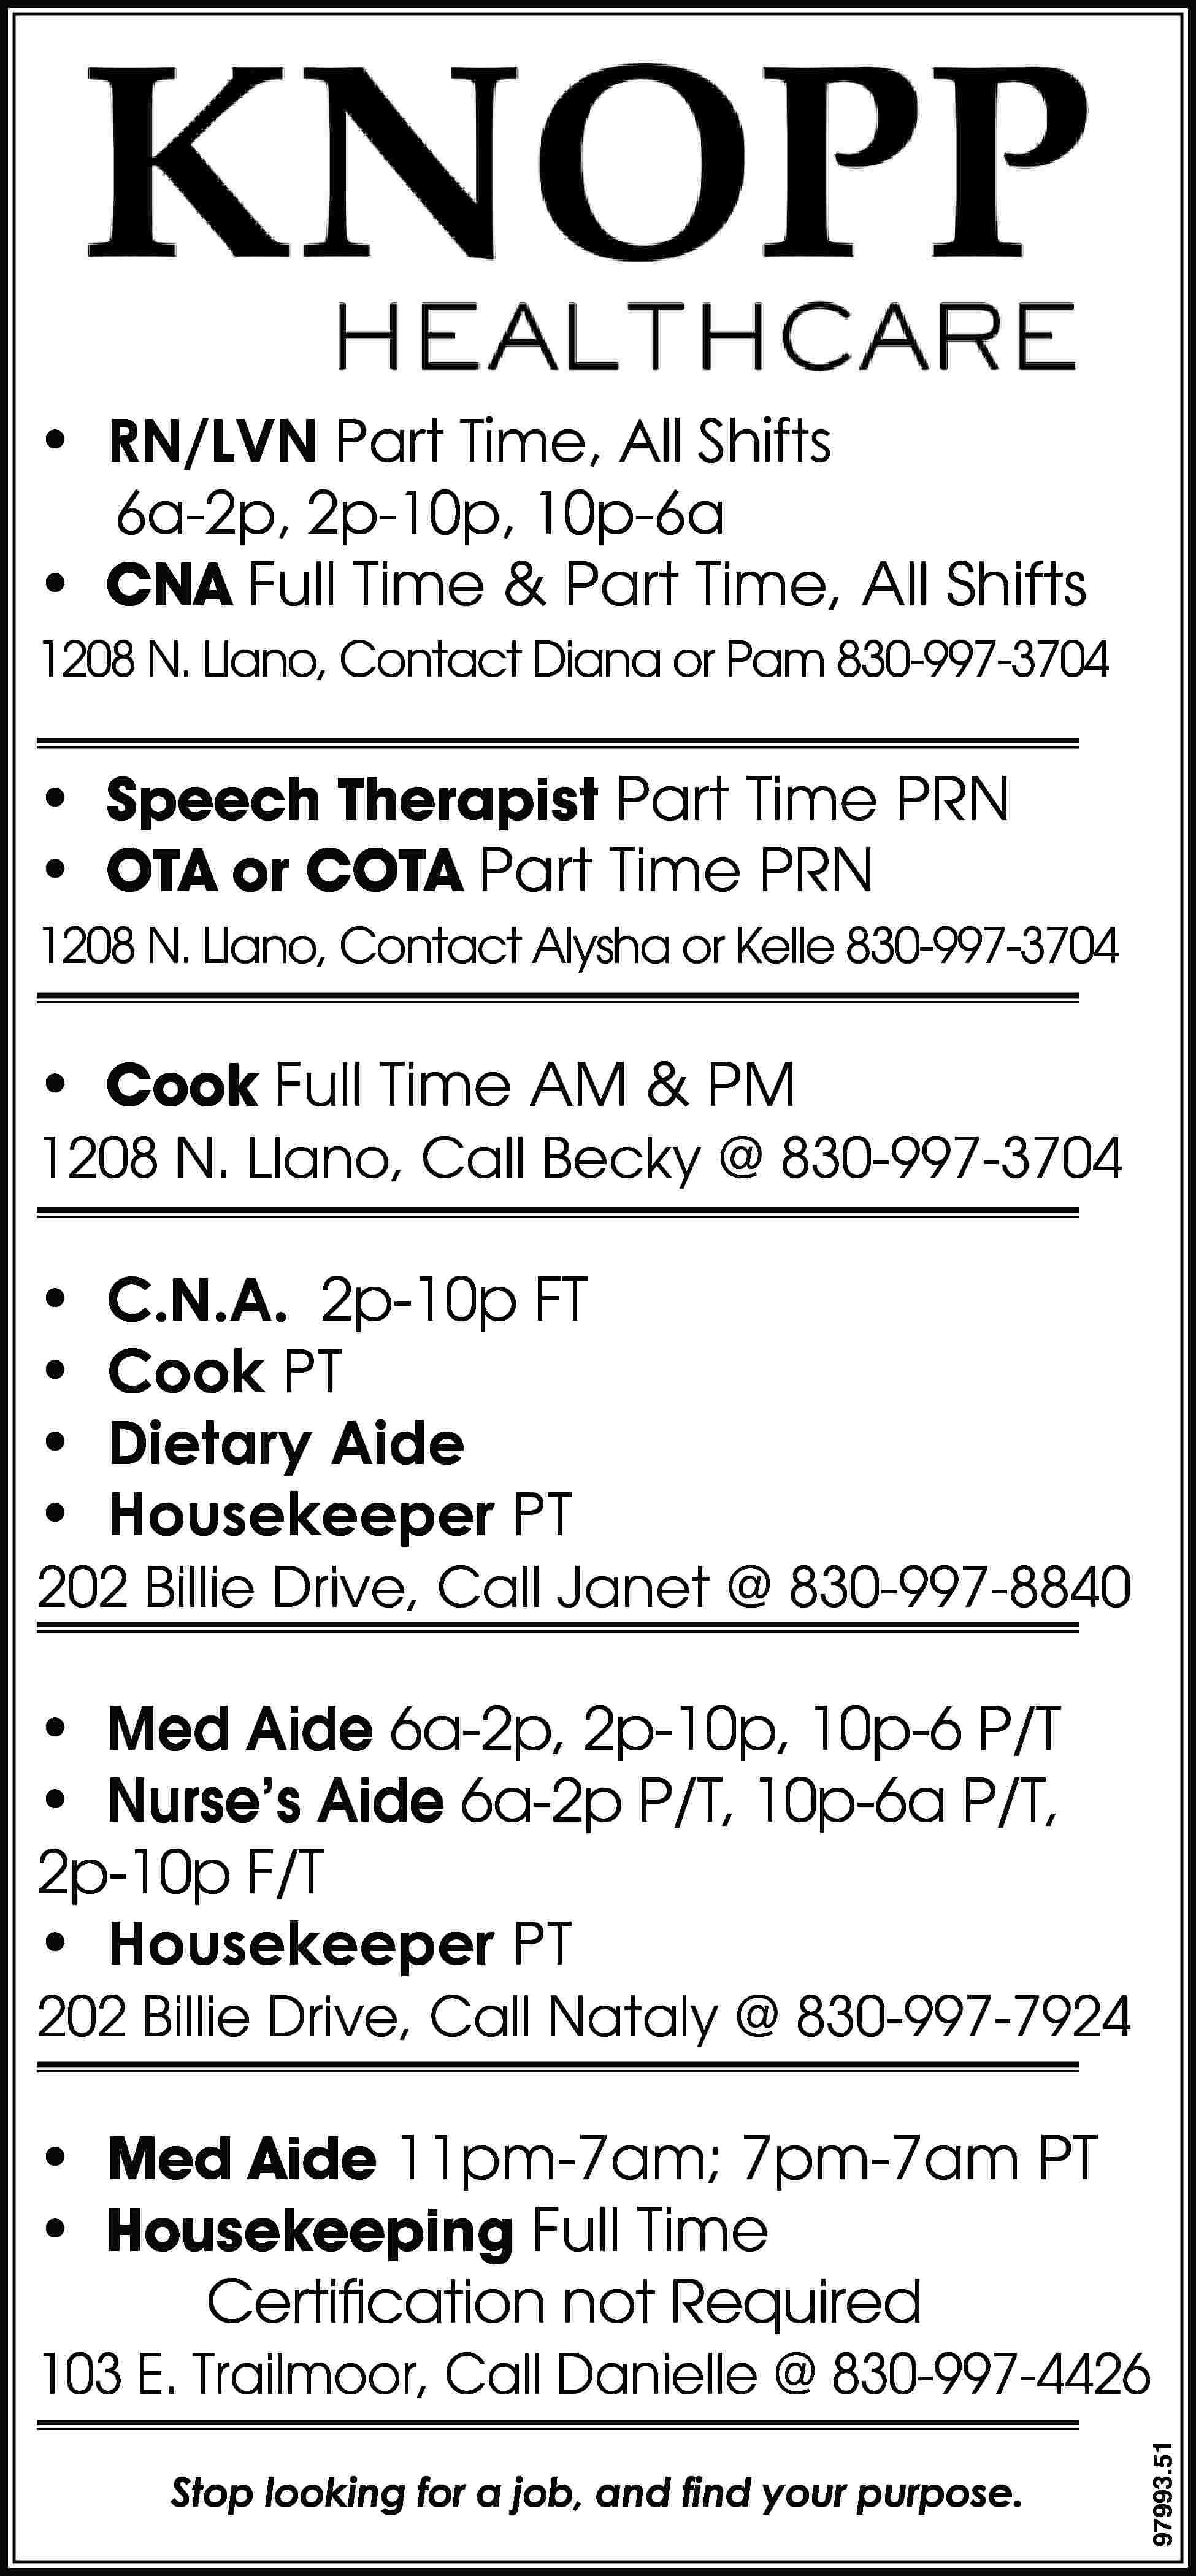 • RN/LVN Part Time, All  • RN/LVN Part Time, All Shifts 6a-2p, 2p-10p, 10p-6a • CNA Full Time & Part Time, All Shifts 1208 N. Llano, Contact Diana or Pam 830-997-3704 • Speech Therapist Part Time PRN • OTA or COTA Part Time PRN 1208 N. Llano, Contact Alysha or Kelle 830-997-3704 • Cook Full Time AM & PM 1208 N. Llano, Call Becky @ 830-997-3704 • • • • C.N.A. 2p-10p FT Cook PT Dietary Aide Housekeeper PT 202 Billie Drive, Call Janet @ 830-997-8840 • Med Aide 6a-2p, 2p-10p, 10p-6 P/T • Nurse’s Aide 6a-2p P/T, 10p-6a P/T, 2p-10p F/T • Housekeeper PT 202 Billie Drive, Call Nataly @ 830-997-7924 • Med Aide 11pm-7am; 7pm-7am PT • Housekeeping Full Time Certification not Required Stop looking for a job, and find your purpose. 97993.51 103 E. Trailmoor, Call Danielle @ 830-997-4426